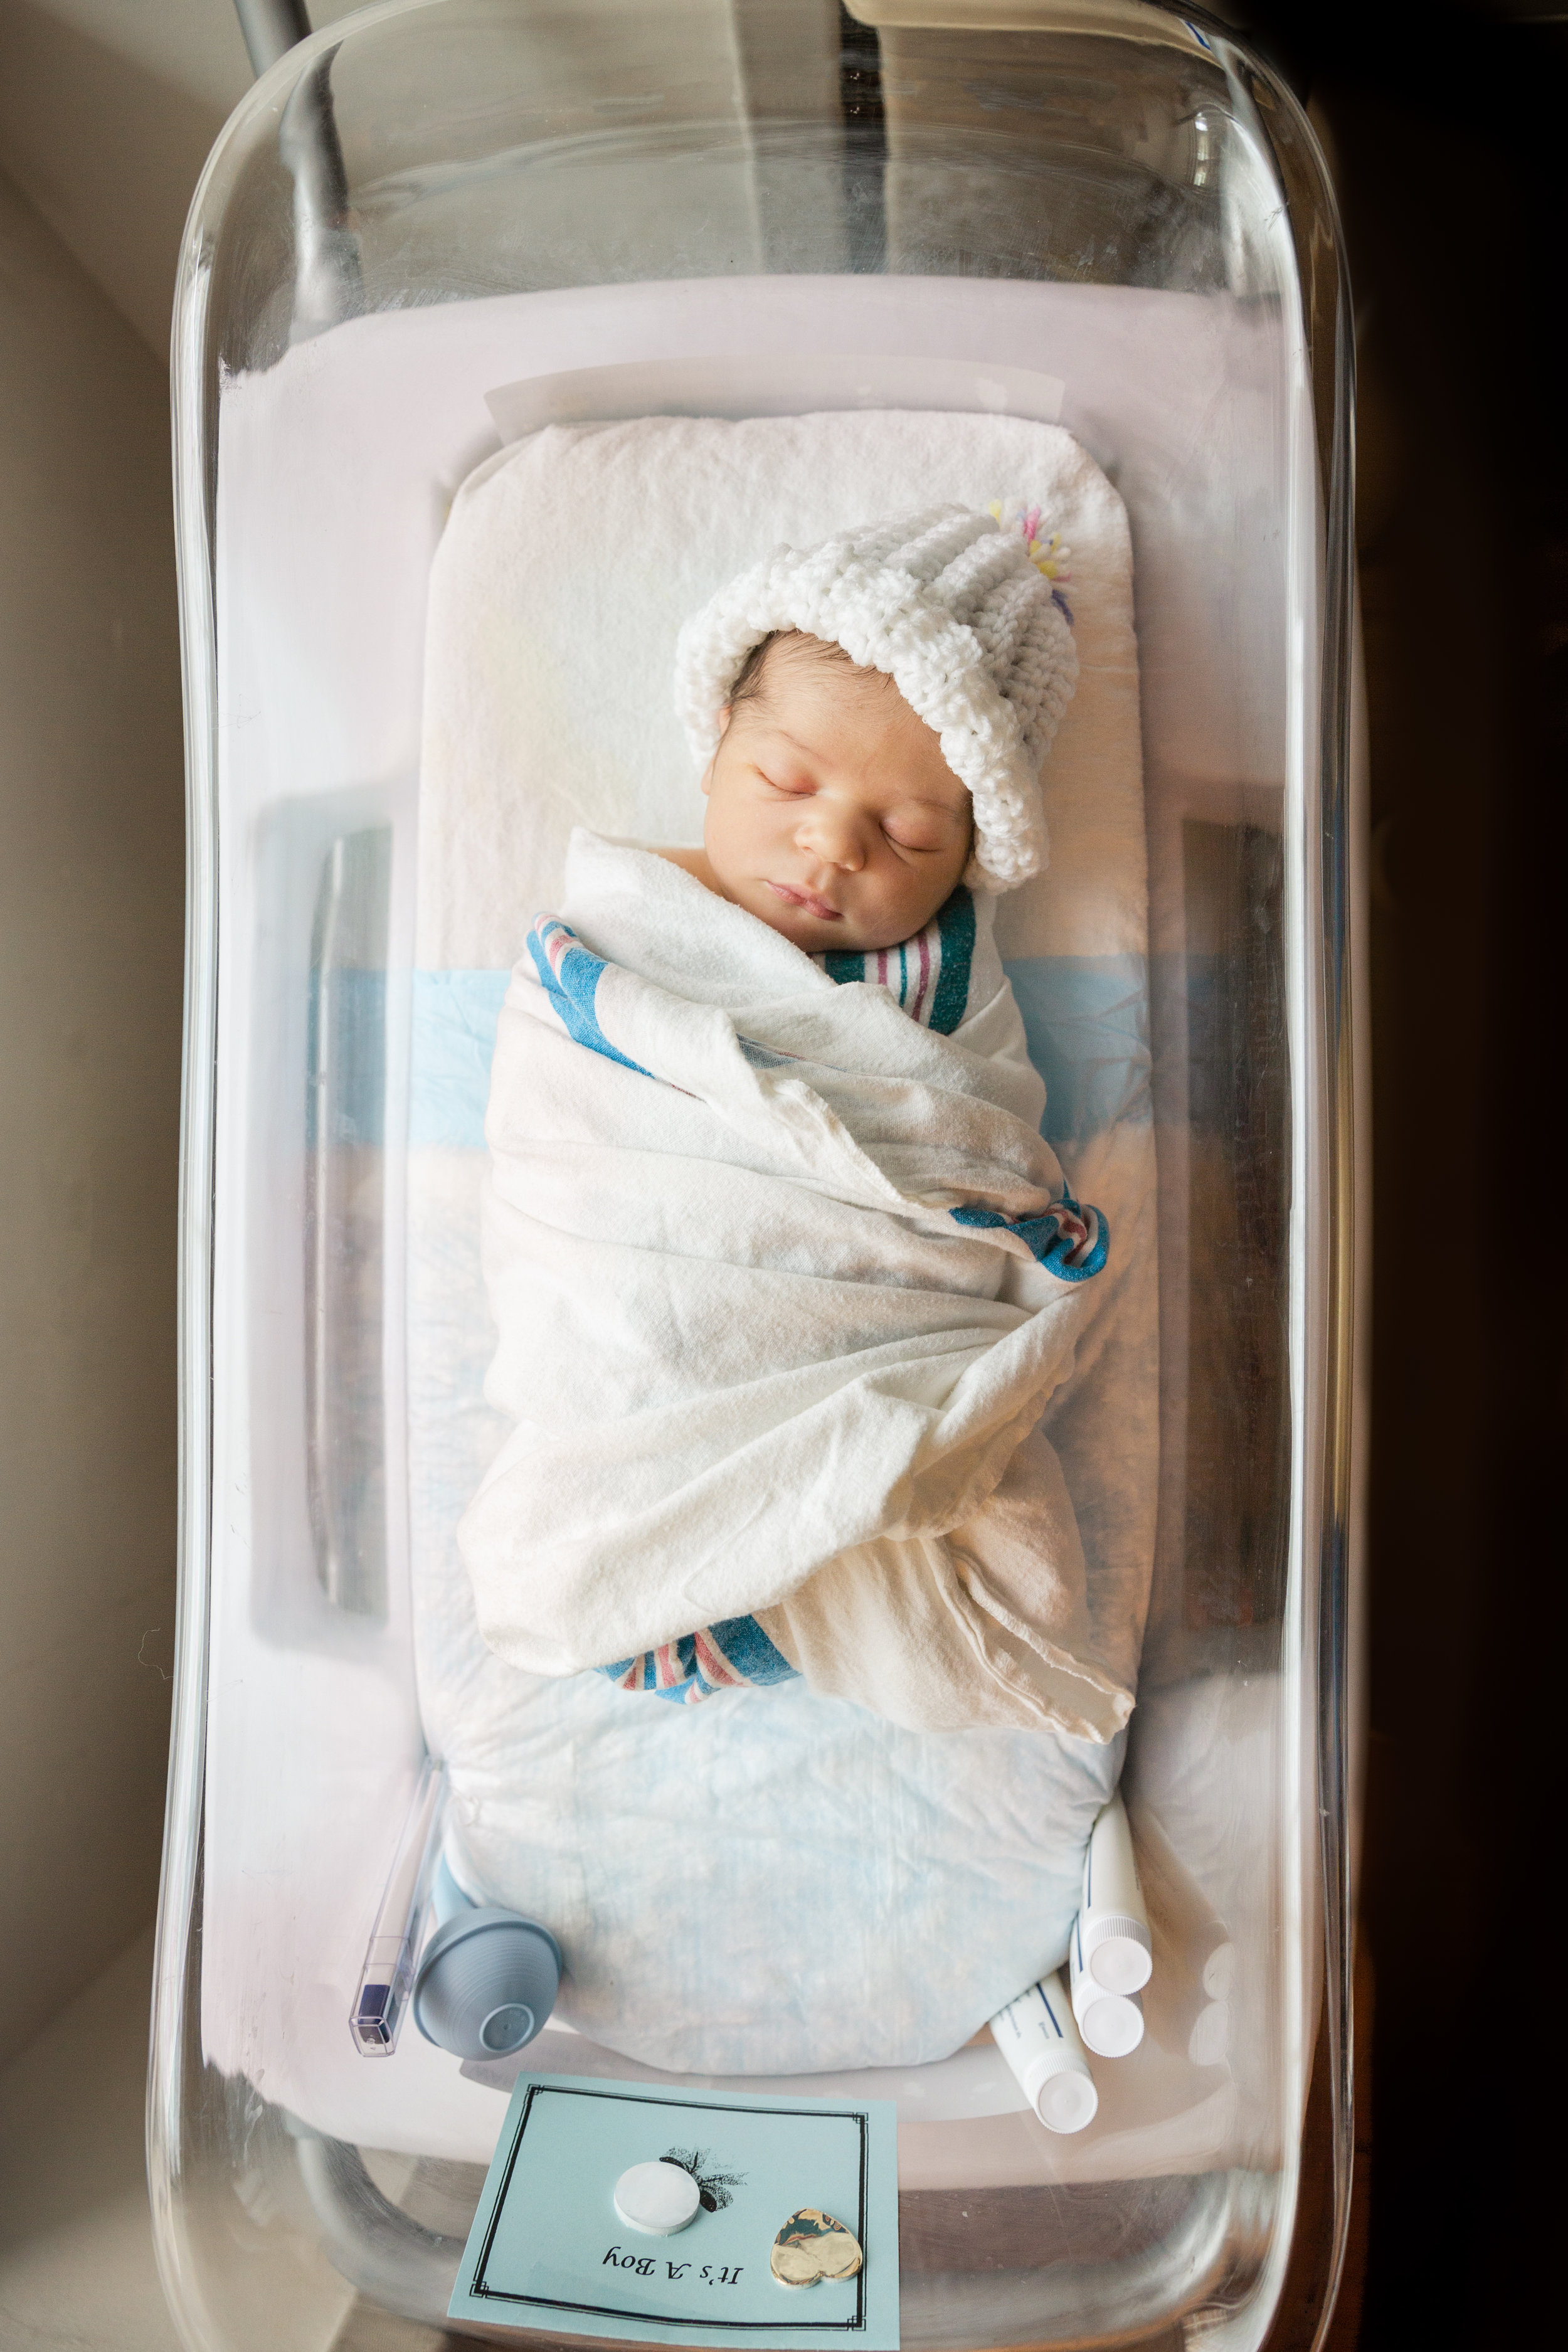 photograph of infant baby boy from above in hospital bassinet